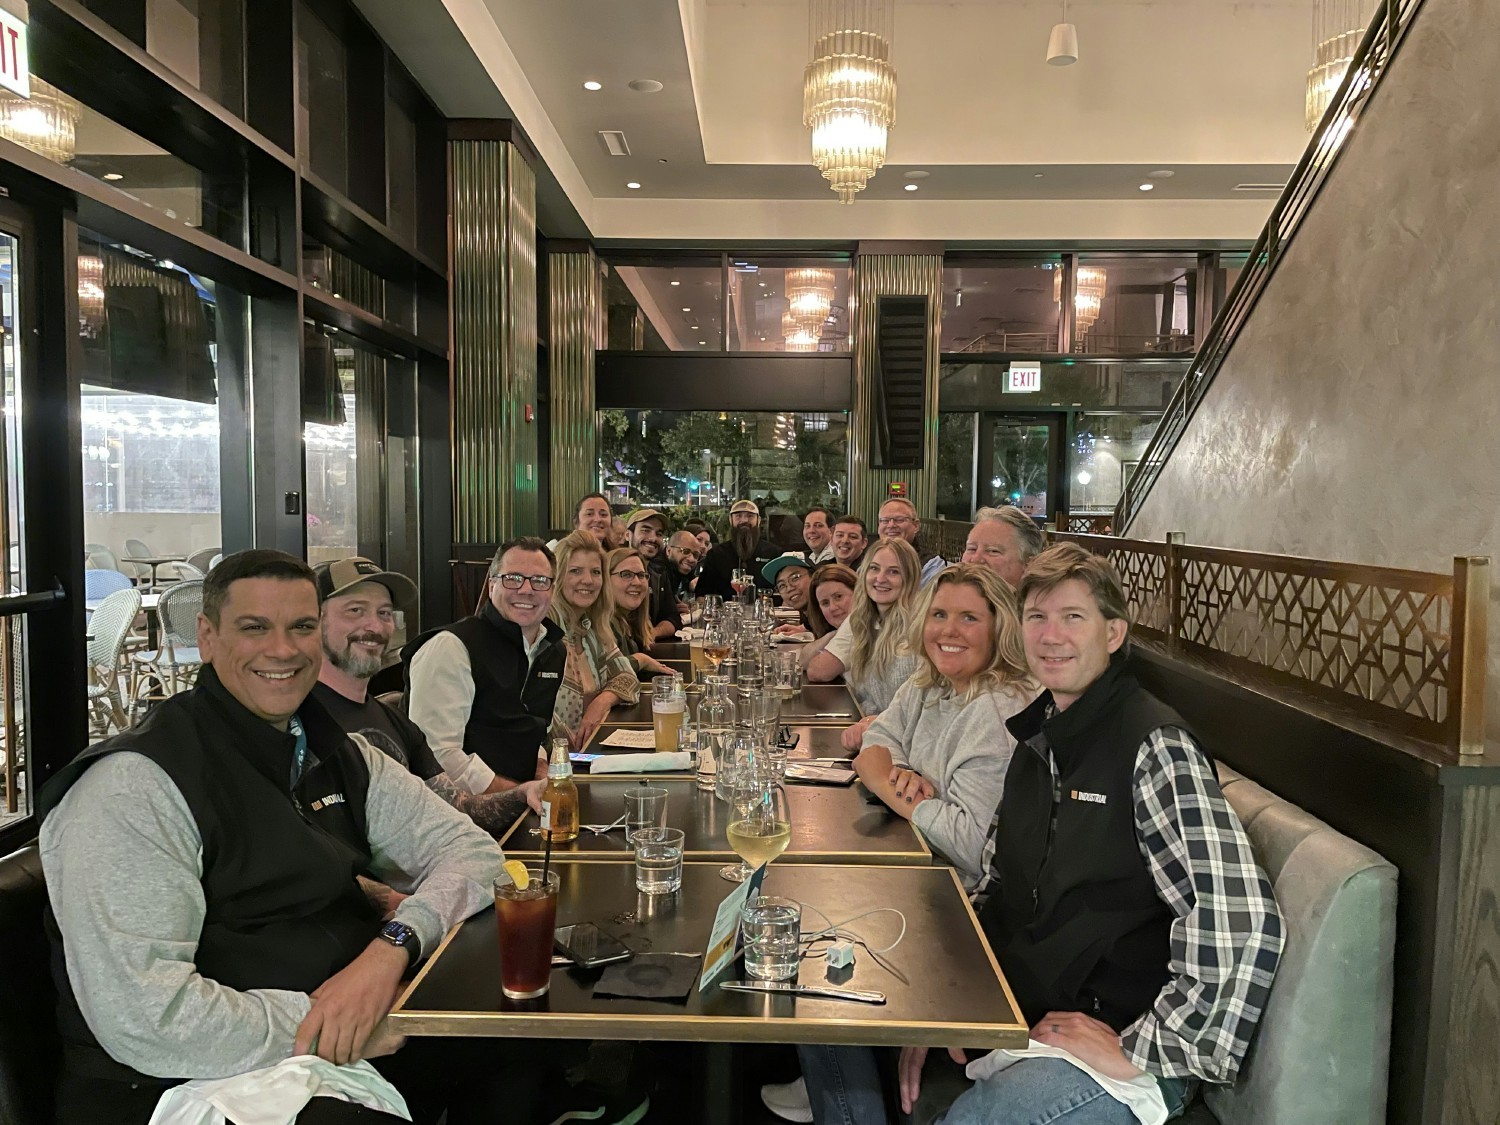 Team INDUSTRIAL dinner in Chicago during International Manufacturing Show (IMTS)